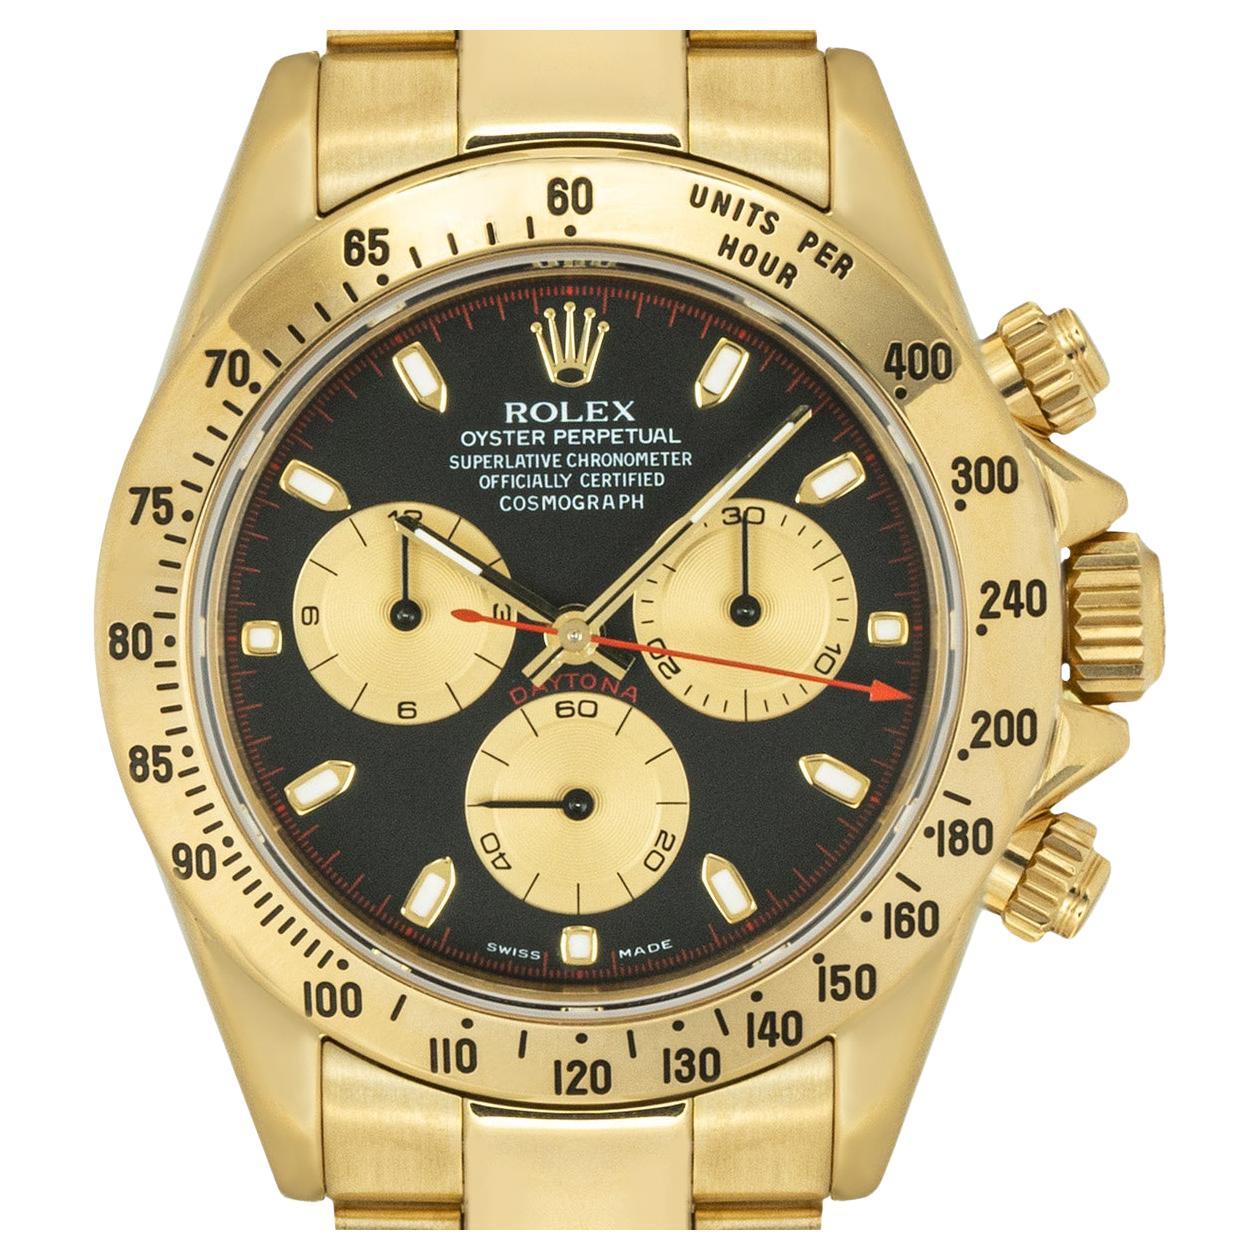 A yellow gold Cosmograph Daytona by Rolex. Featuring a Paul Newman black dial with contrasting outer minute track and champagne sub-dials as well as a yellow gold tachymeter bezel.

Fitted with a sapphire glass, a self-winding Cosmograph movement